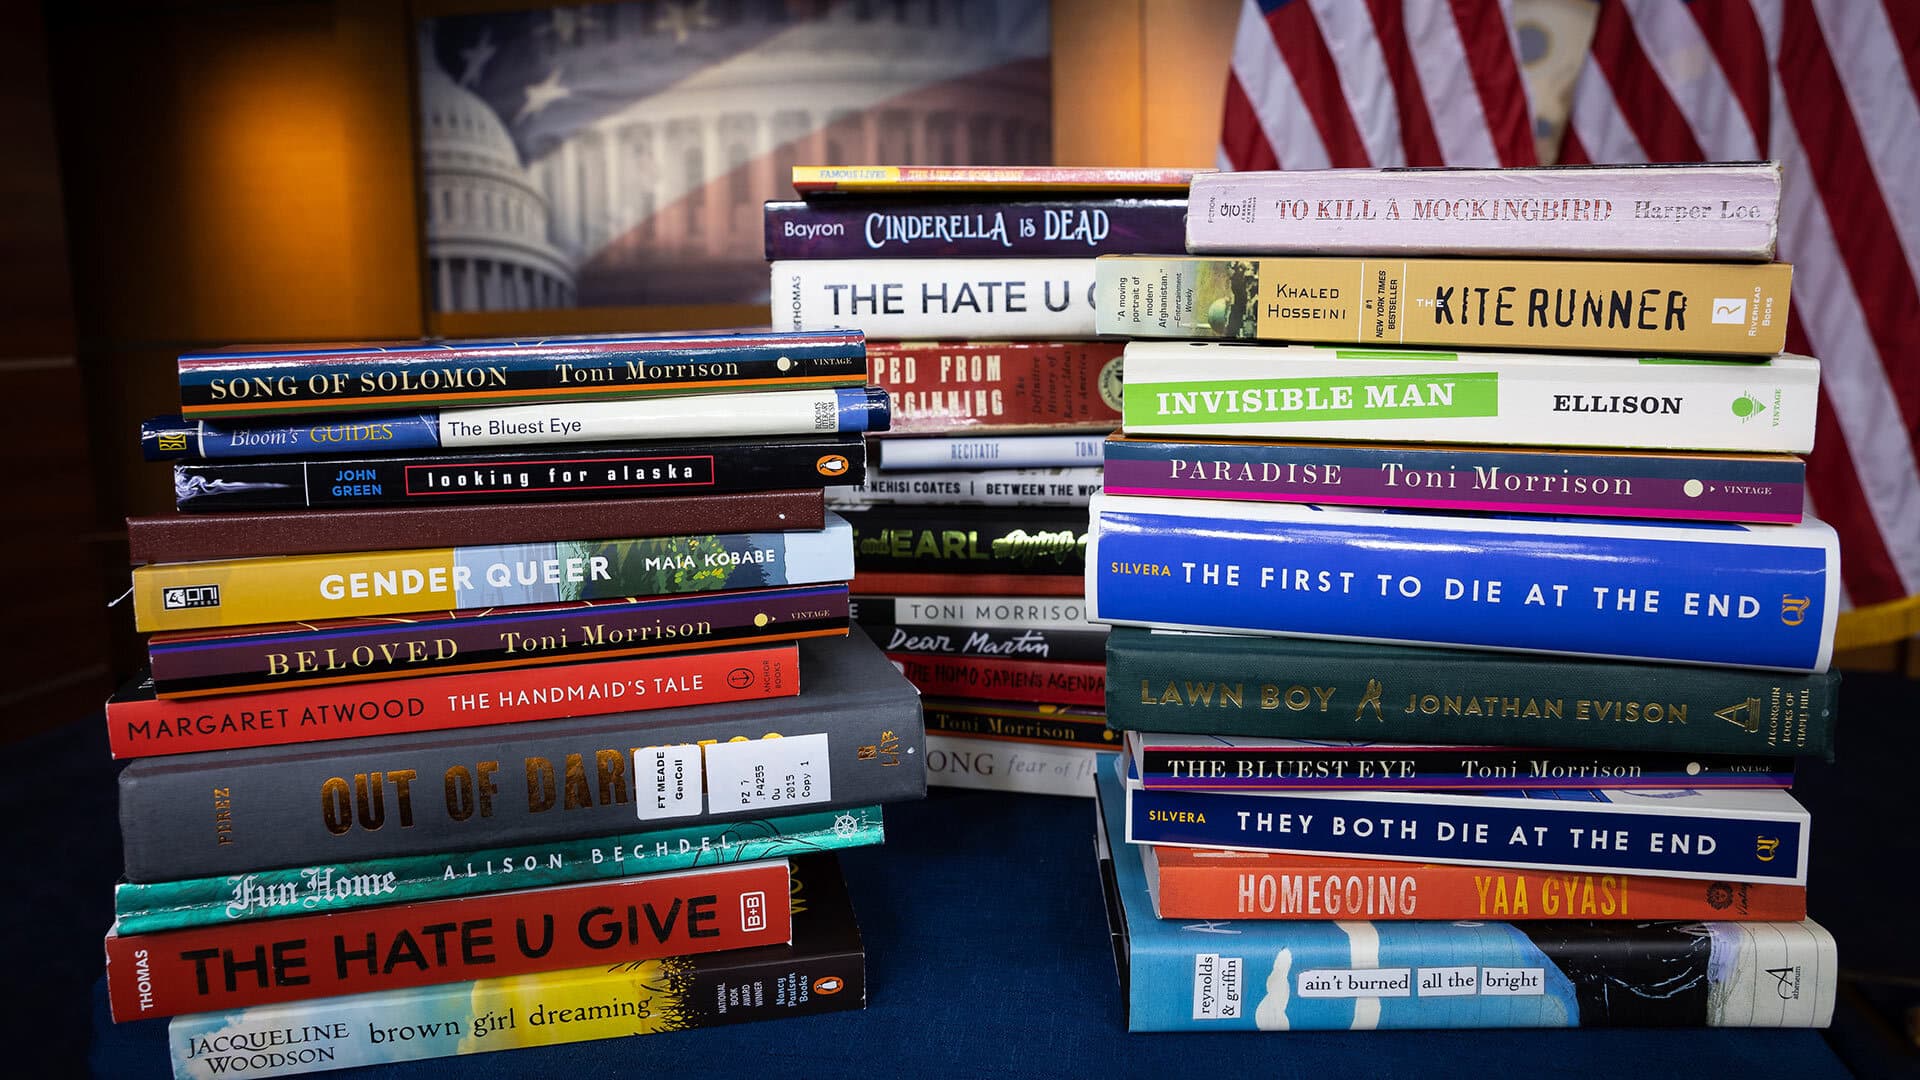 Stacks of books with American flags in the background